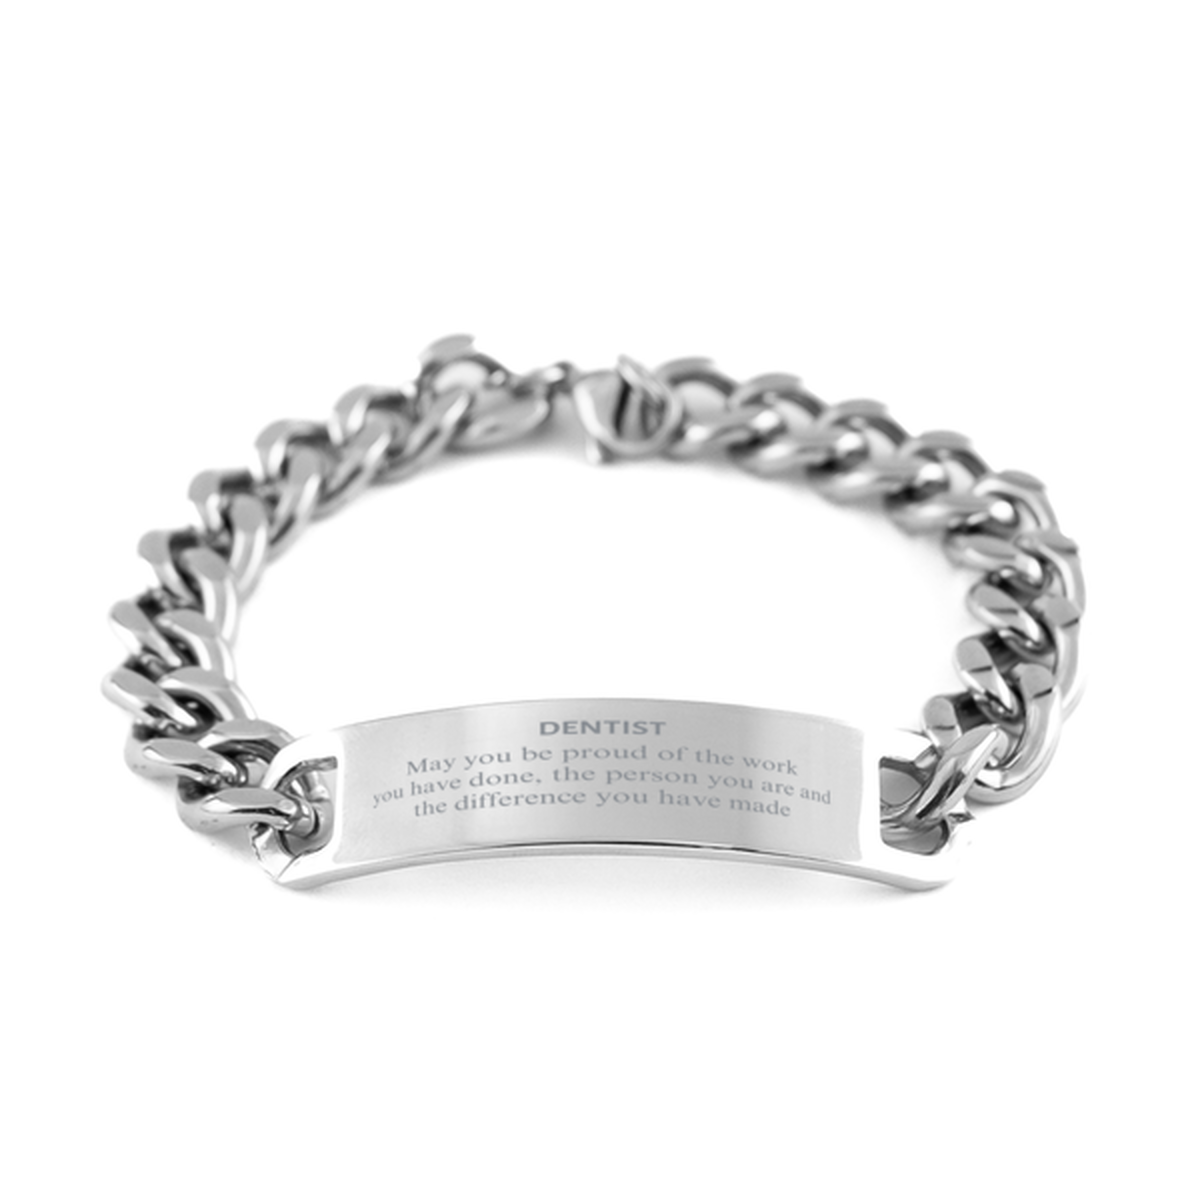 Dentist May you be proud of the work you have done, Retirement Dentist Cuban Chain Stainless Steel Bracelet for Colleague Appreciation Gifts Amazing for Dentist